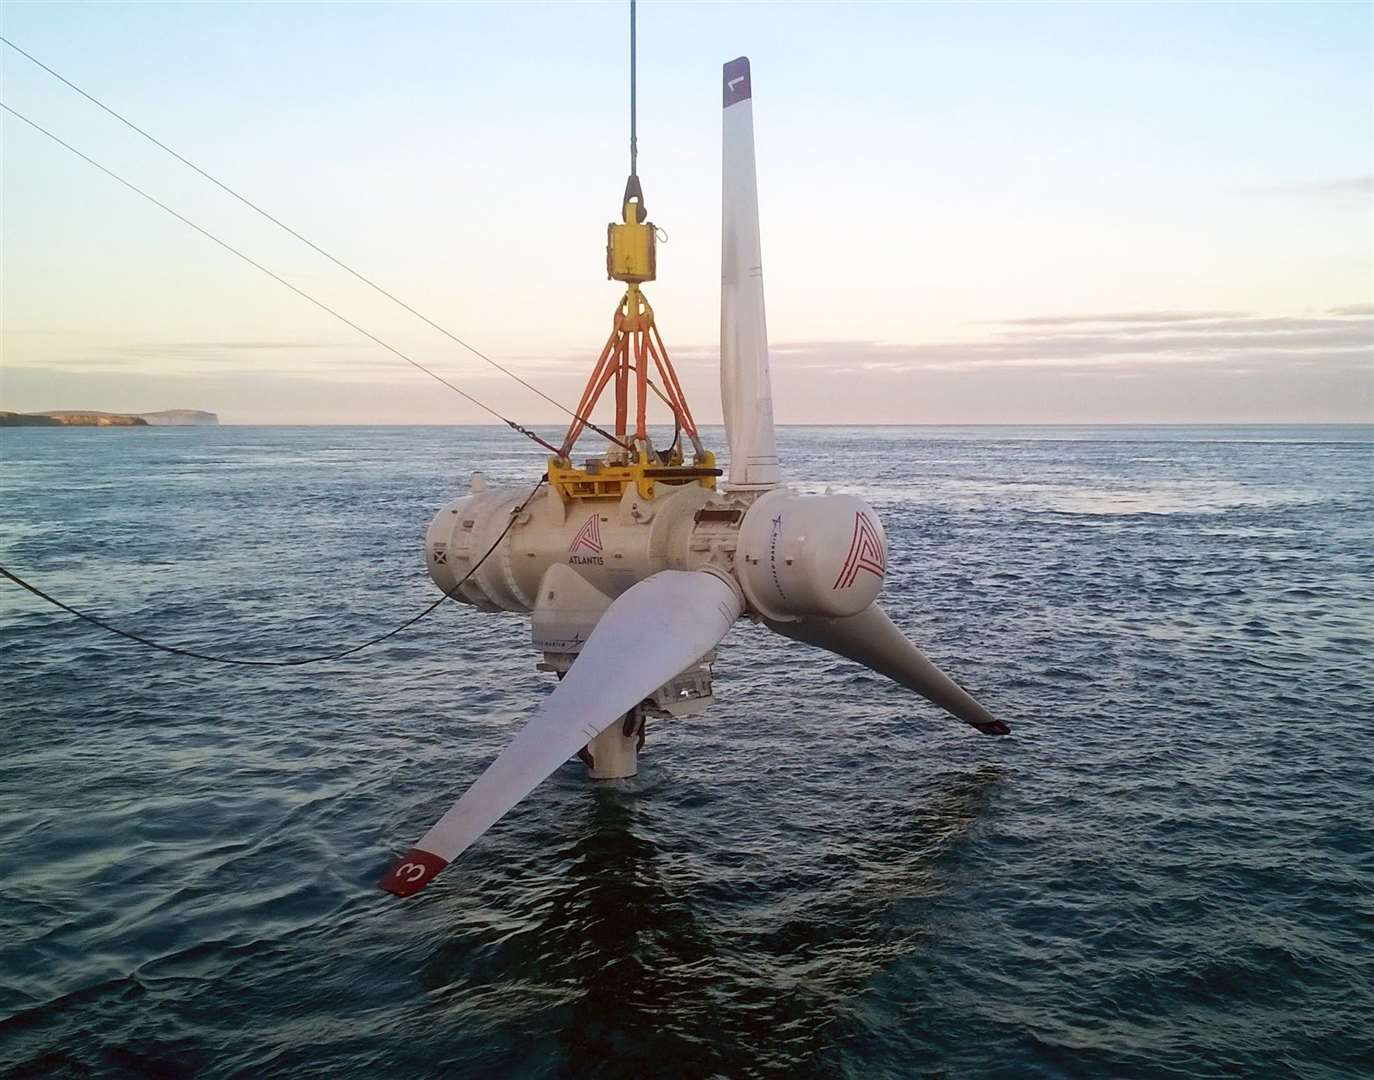 One of MeyGen's underwater turbines. When fully operational, the site is expected to generate 400MW of green electricity.